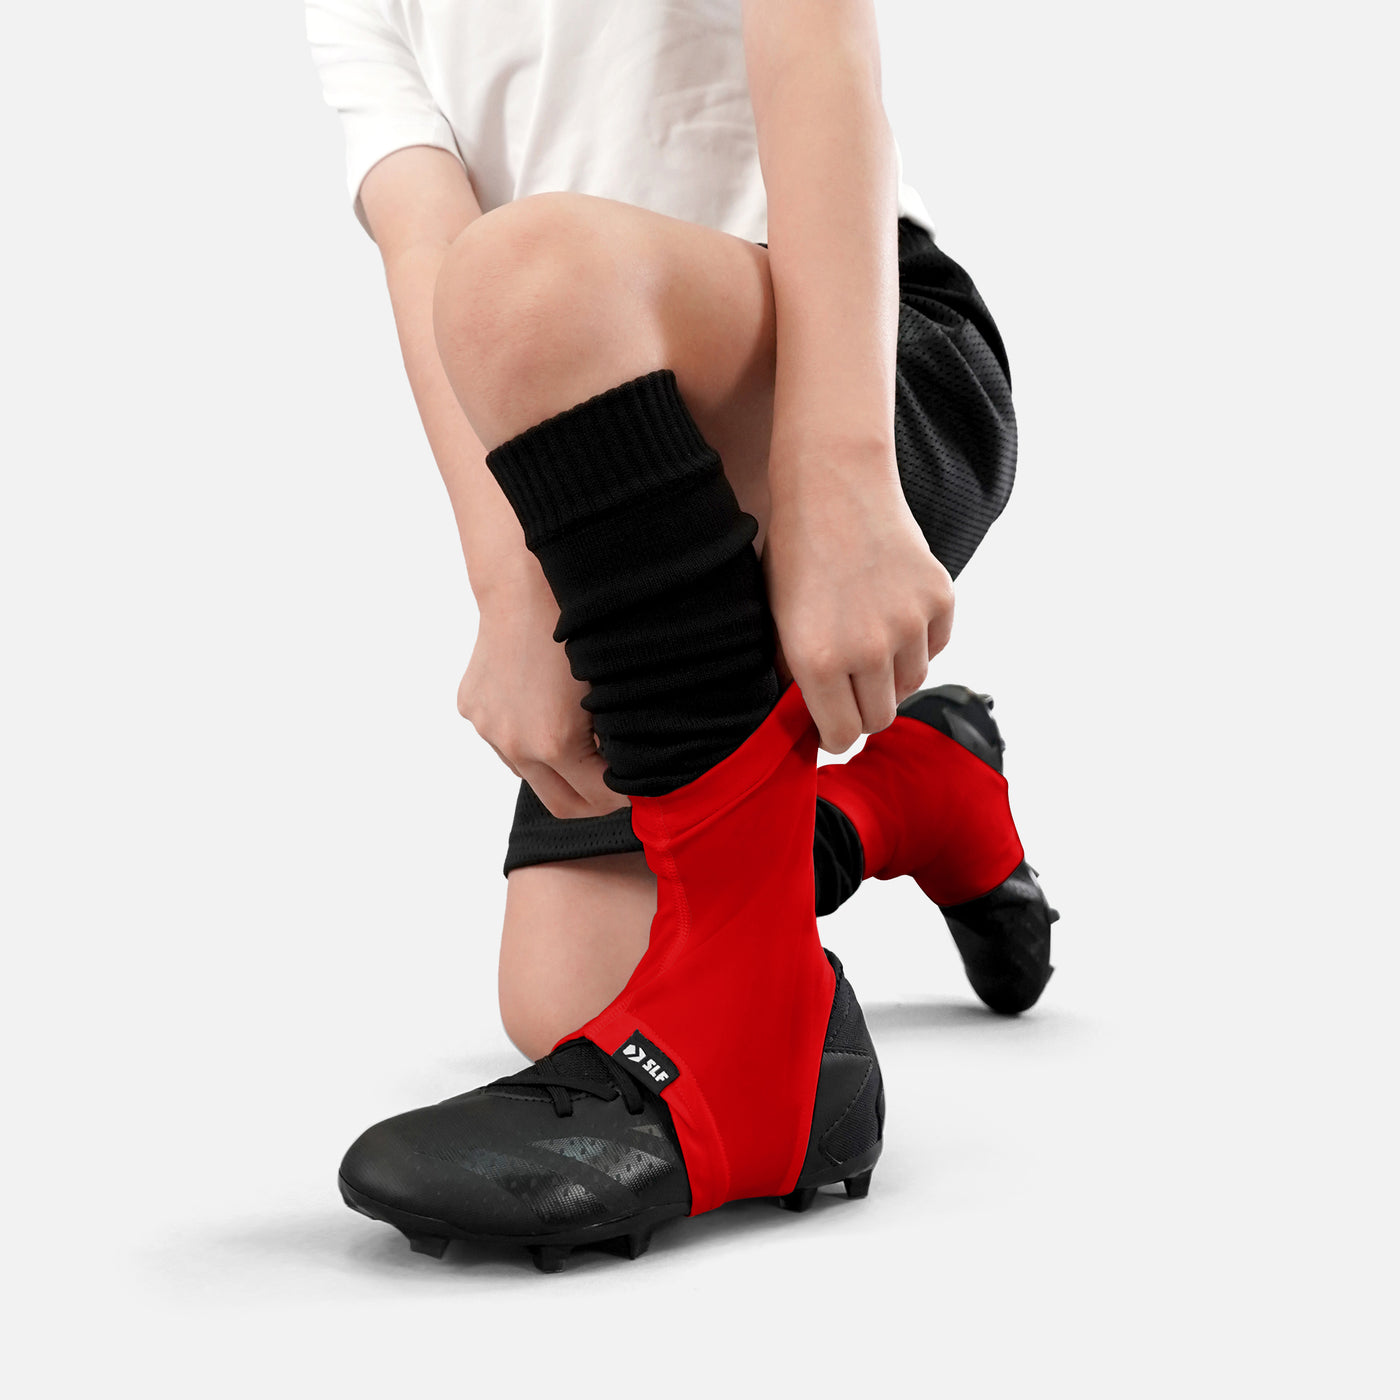 Hue Red Kids Spats / Cleat Covers